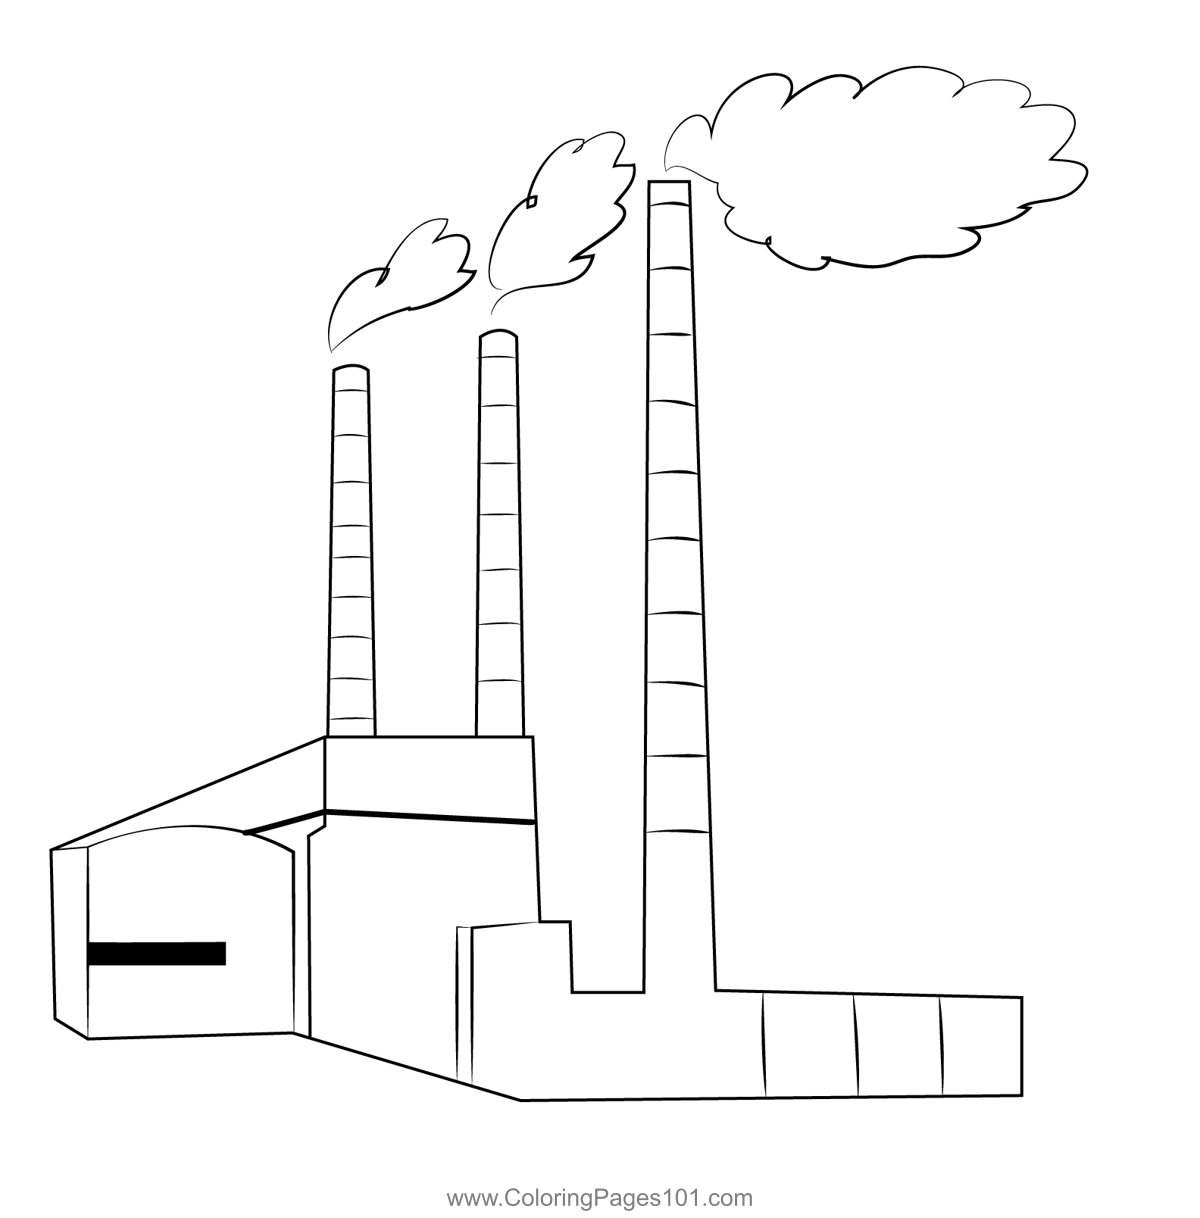 Power Plant 5 Coloring Page for Kids - Free Power Plants Printable ...